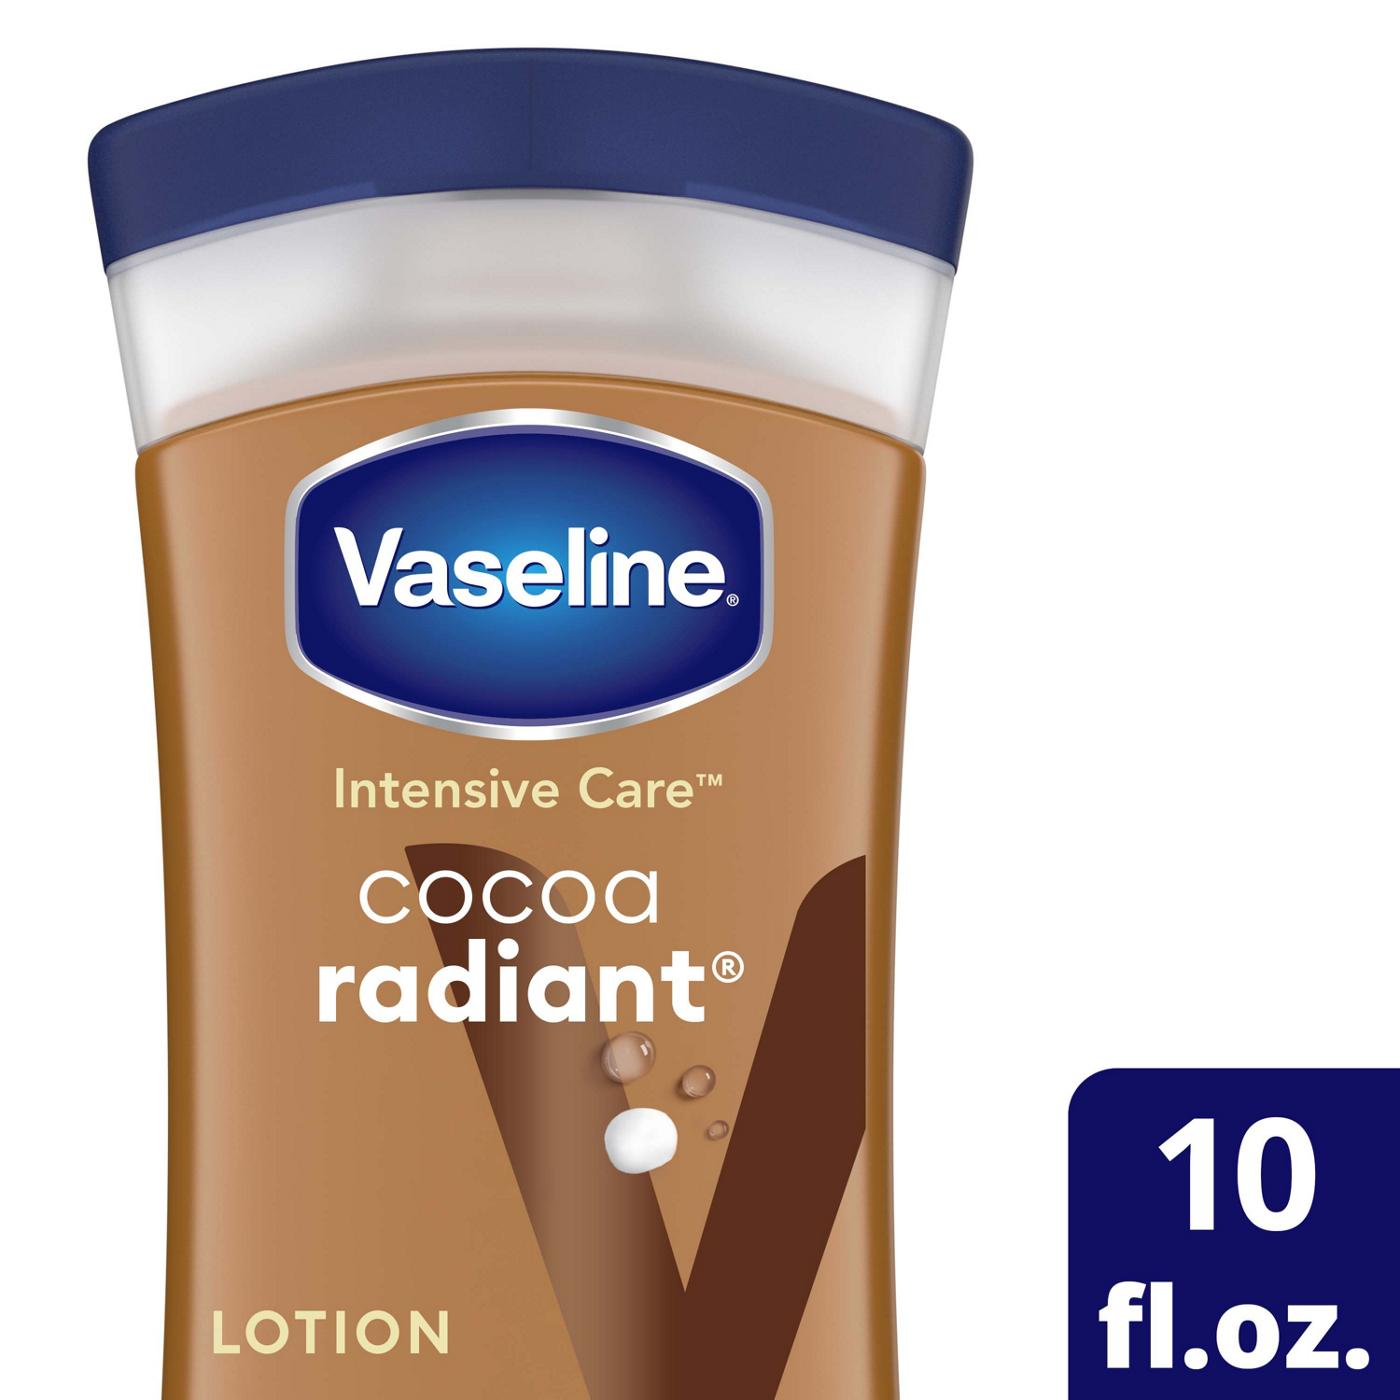 Vaseline Intensive Care Cocoa Radiant Lotion; image 3 of 10